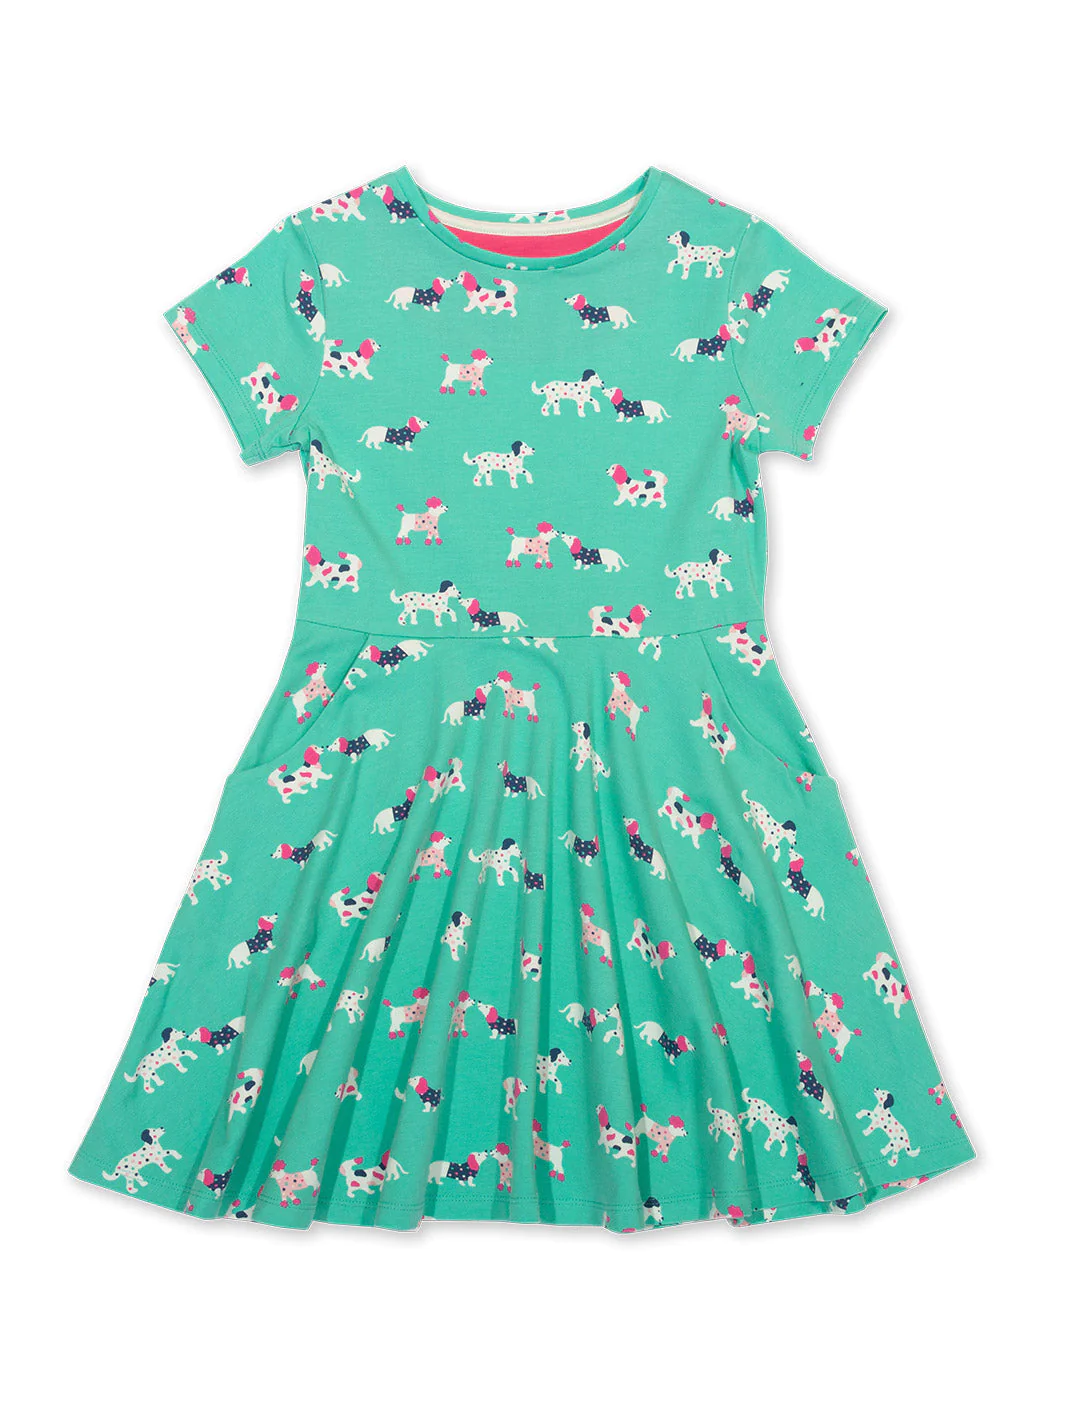 Flora and Friends Skater Dress by Kite